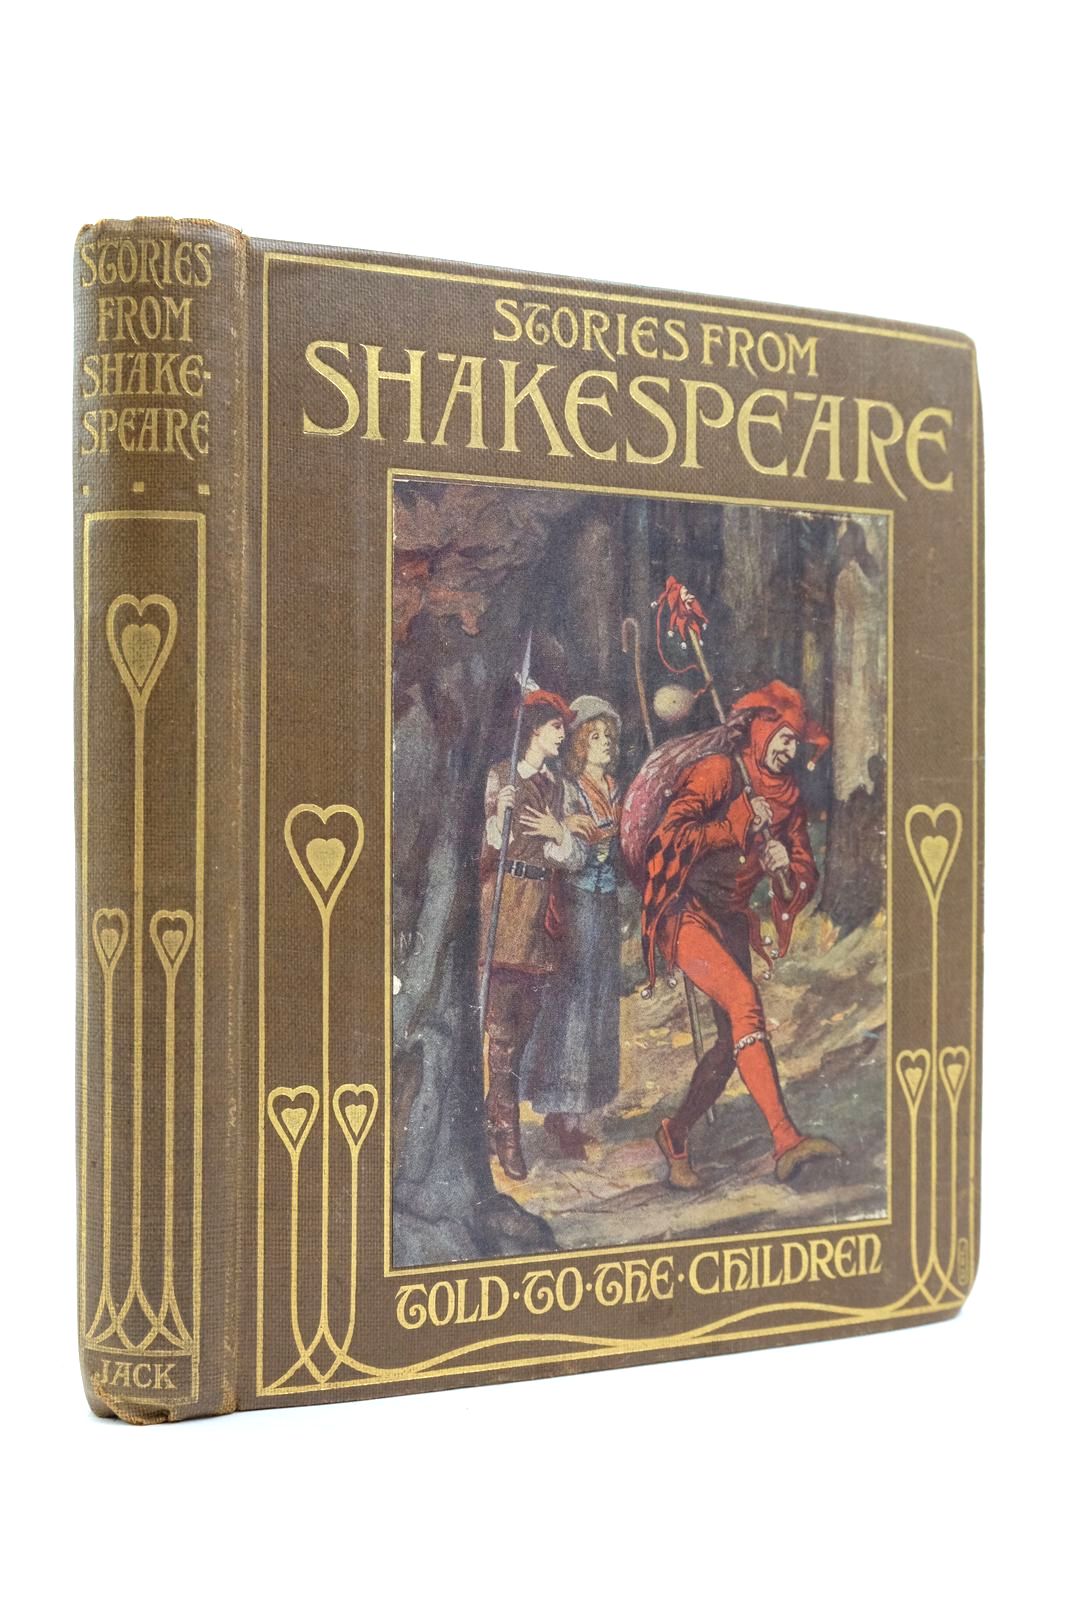 Photo of STORIES FROM SHAKESPEARE written by Lang, Jeanie
Shakespeare, William illustrated by Price, N.M.
et al., published by T.C. & E.C. Jack (STOCK CODE: 2139053)  for sale by Stella & Rose's Books